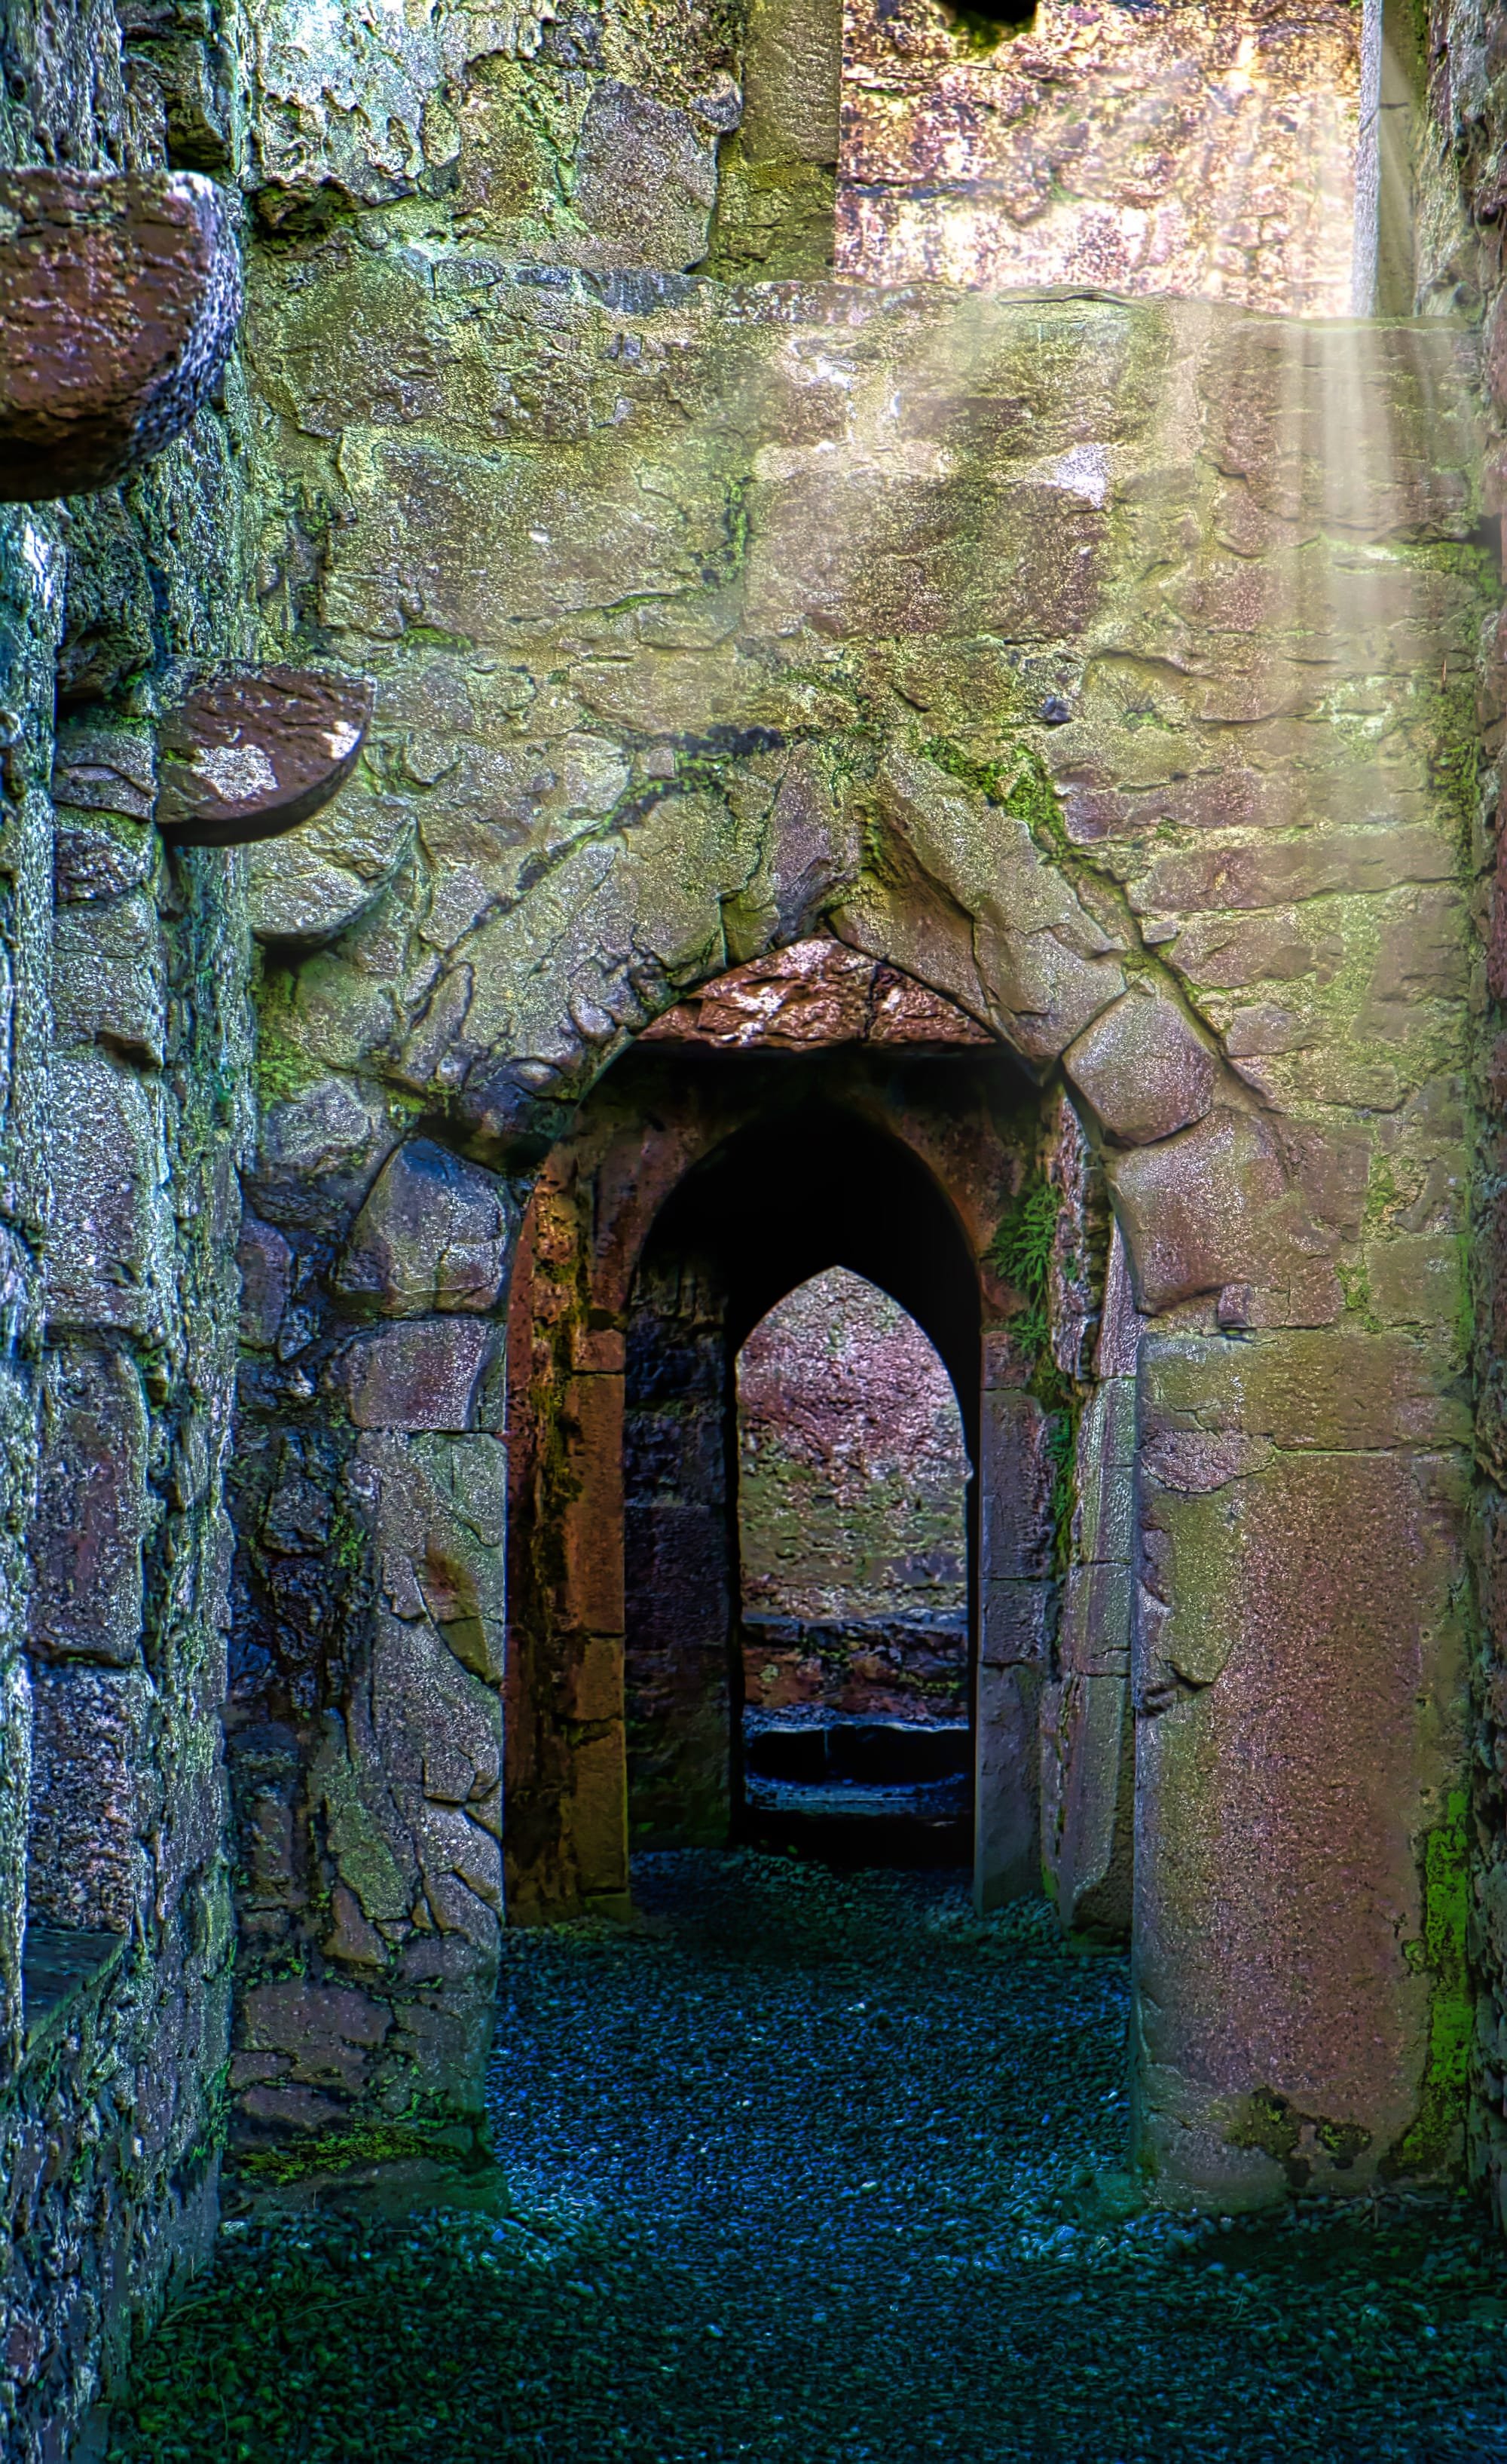 Passageways trodden for over 600 years at Ross Errilly Friary